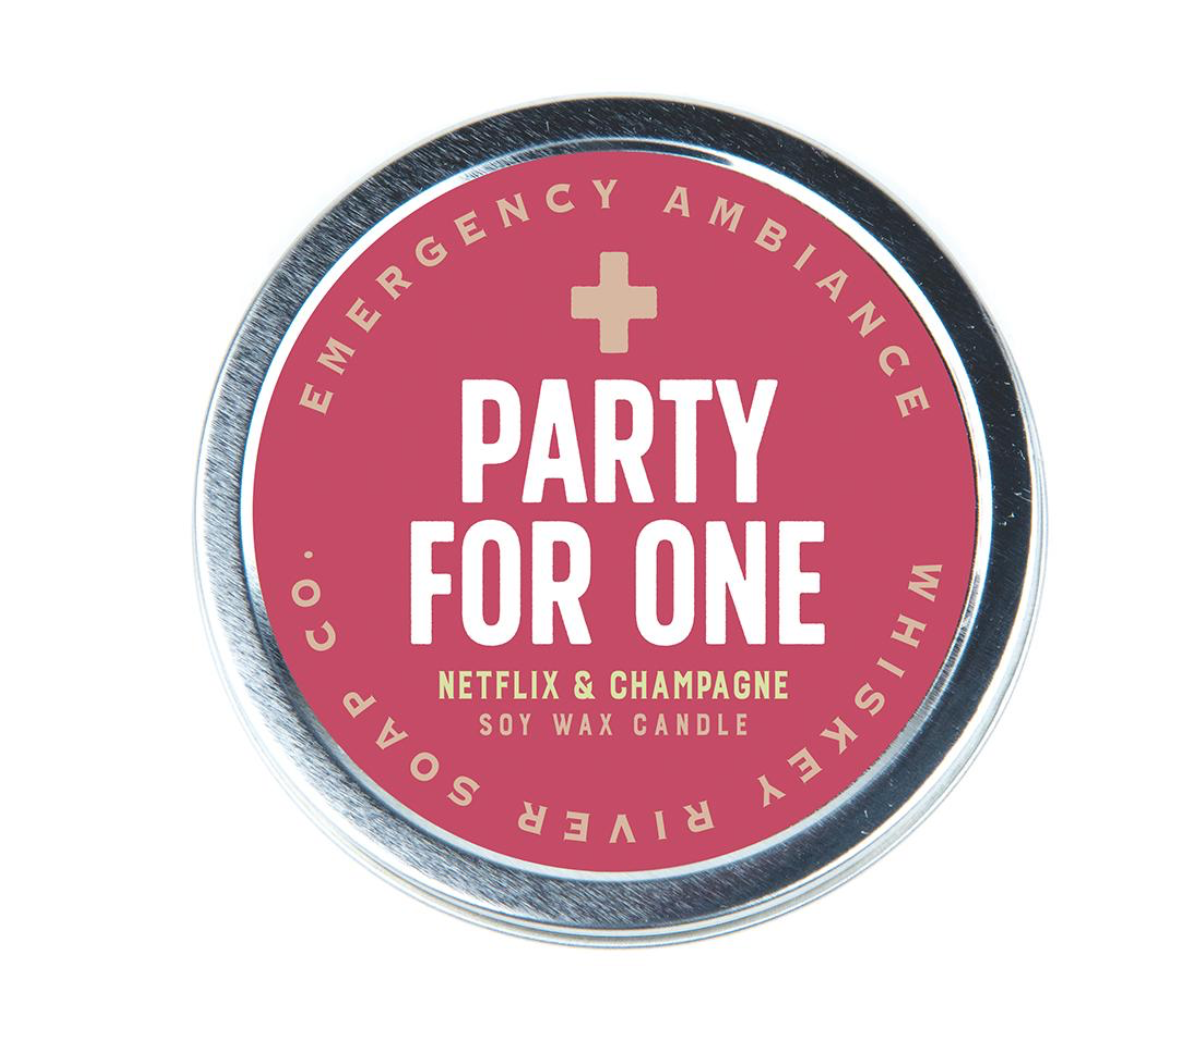 Whiskey River Soap Company Party For One Candle Tin